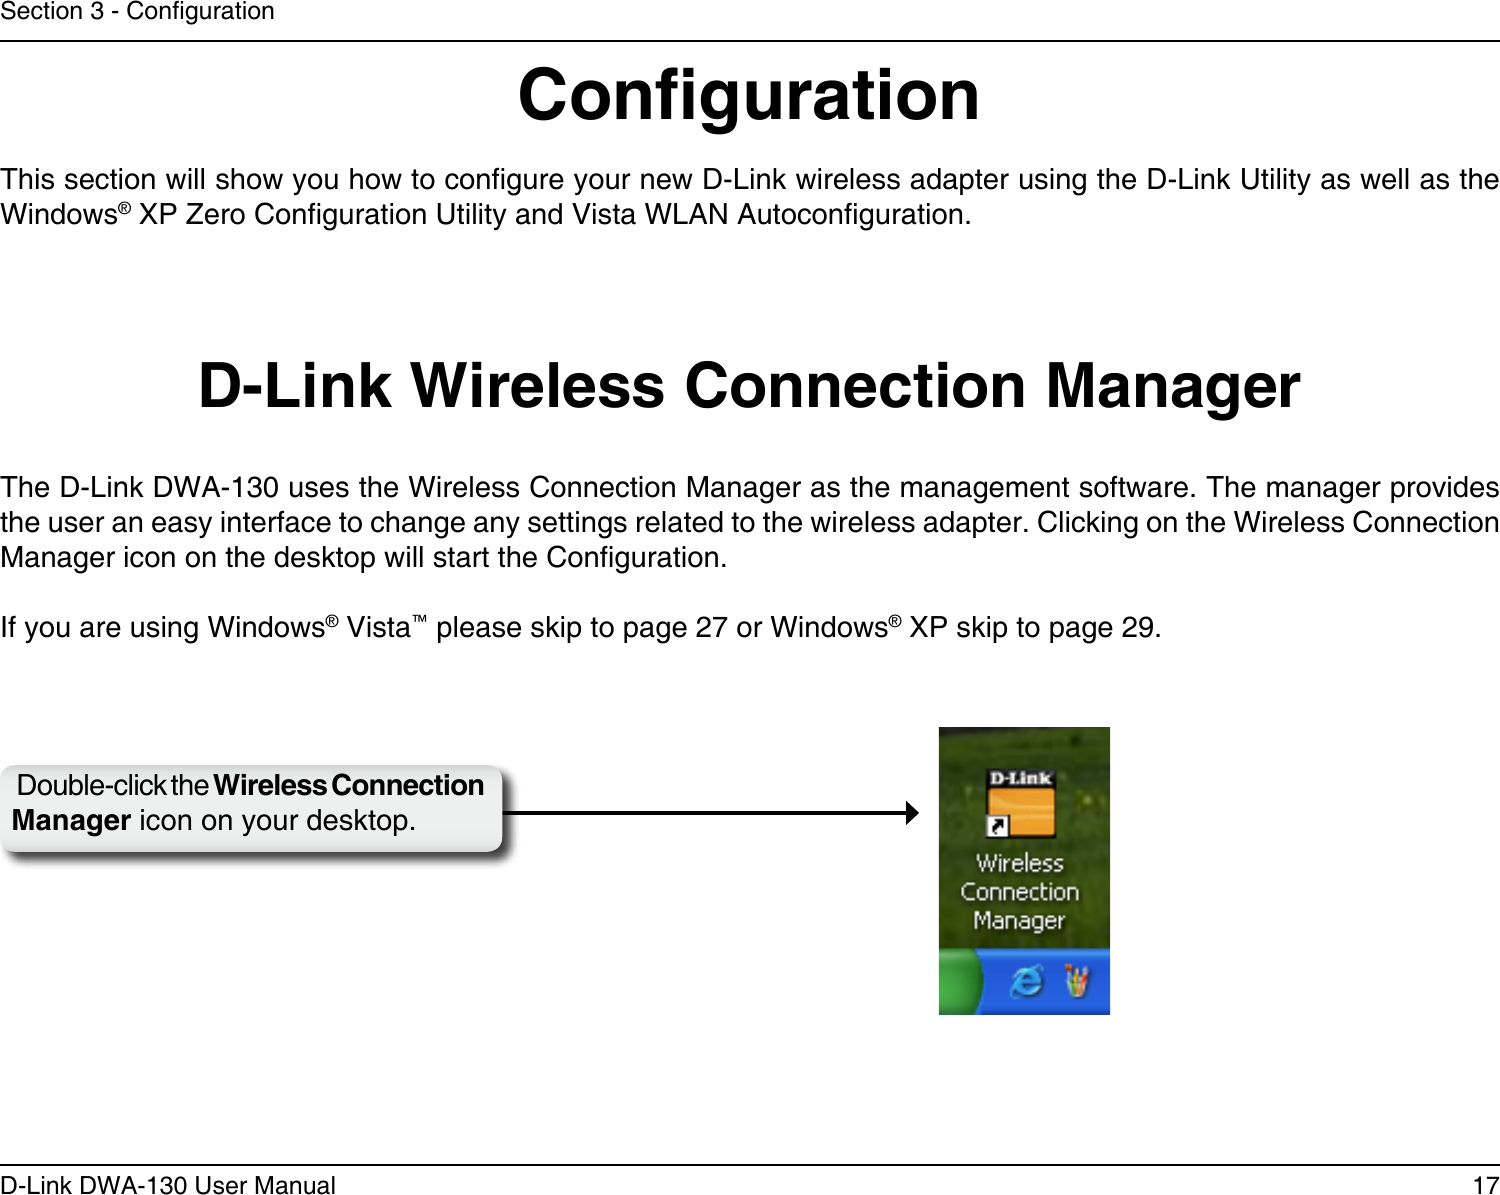 17D-Link DWA-130 User ManualSection 3 - CongurationCongurationThis section will show you how to congure your new D-Link wireless adapter using the D-Link Utility as well as the Windows® XP Zero Conguration Utility and Vista WLAN Autoconguration.D-Link Wireless Connection ManagerThe D-Link DWA-130 uses the Wireless Connection Manager as the management software. The manager provides the user an easy interface to change any settings related to the wireless adapter. Clicking on the Wireless Connection Manager icon on the desktop will start the Conguration.If you are using Windows® Vista™ please skip to page 27 or Windows® XP skip to page 29.Double-click the Wireless Connection Manager icon on your desktop.